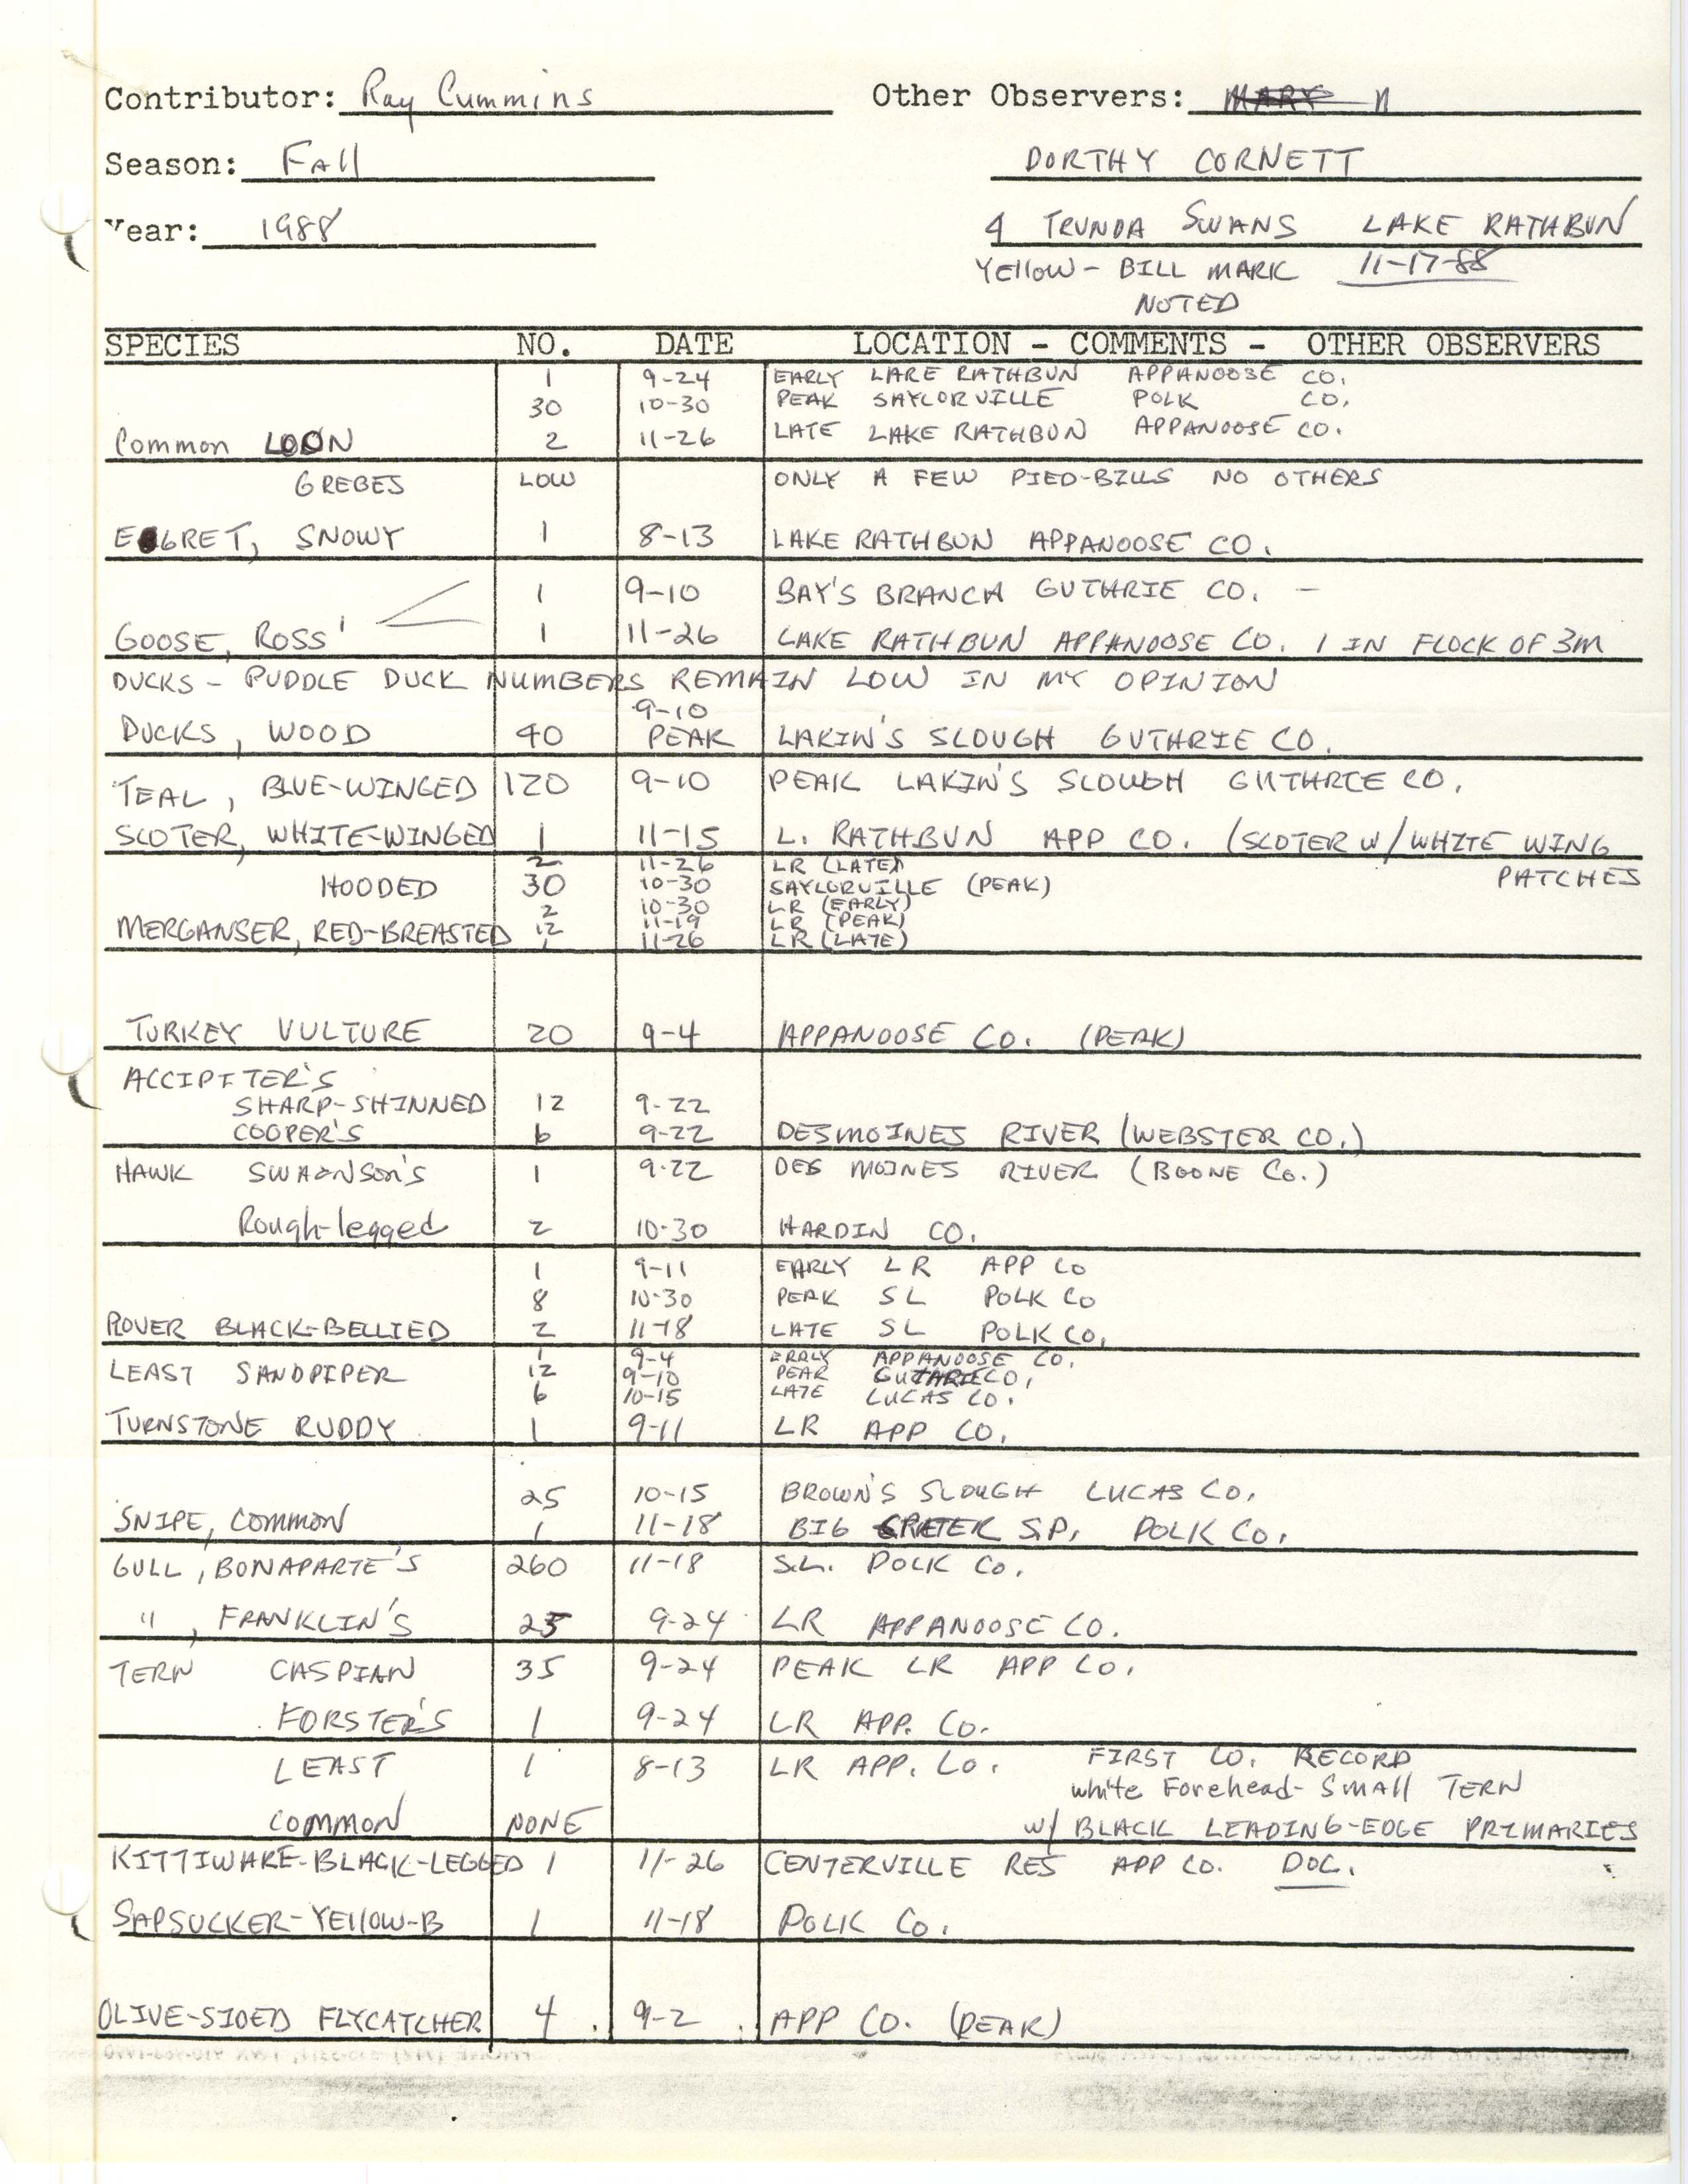 Field notes contributed by Raymond L. Cummins, fall 1988